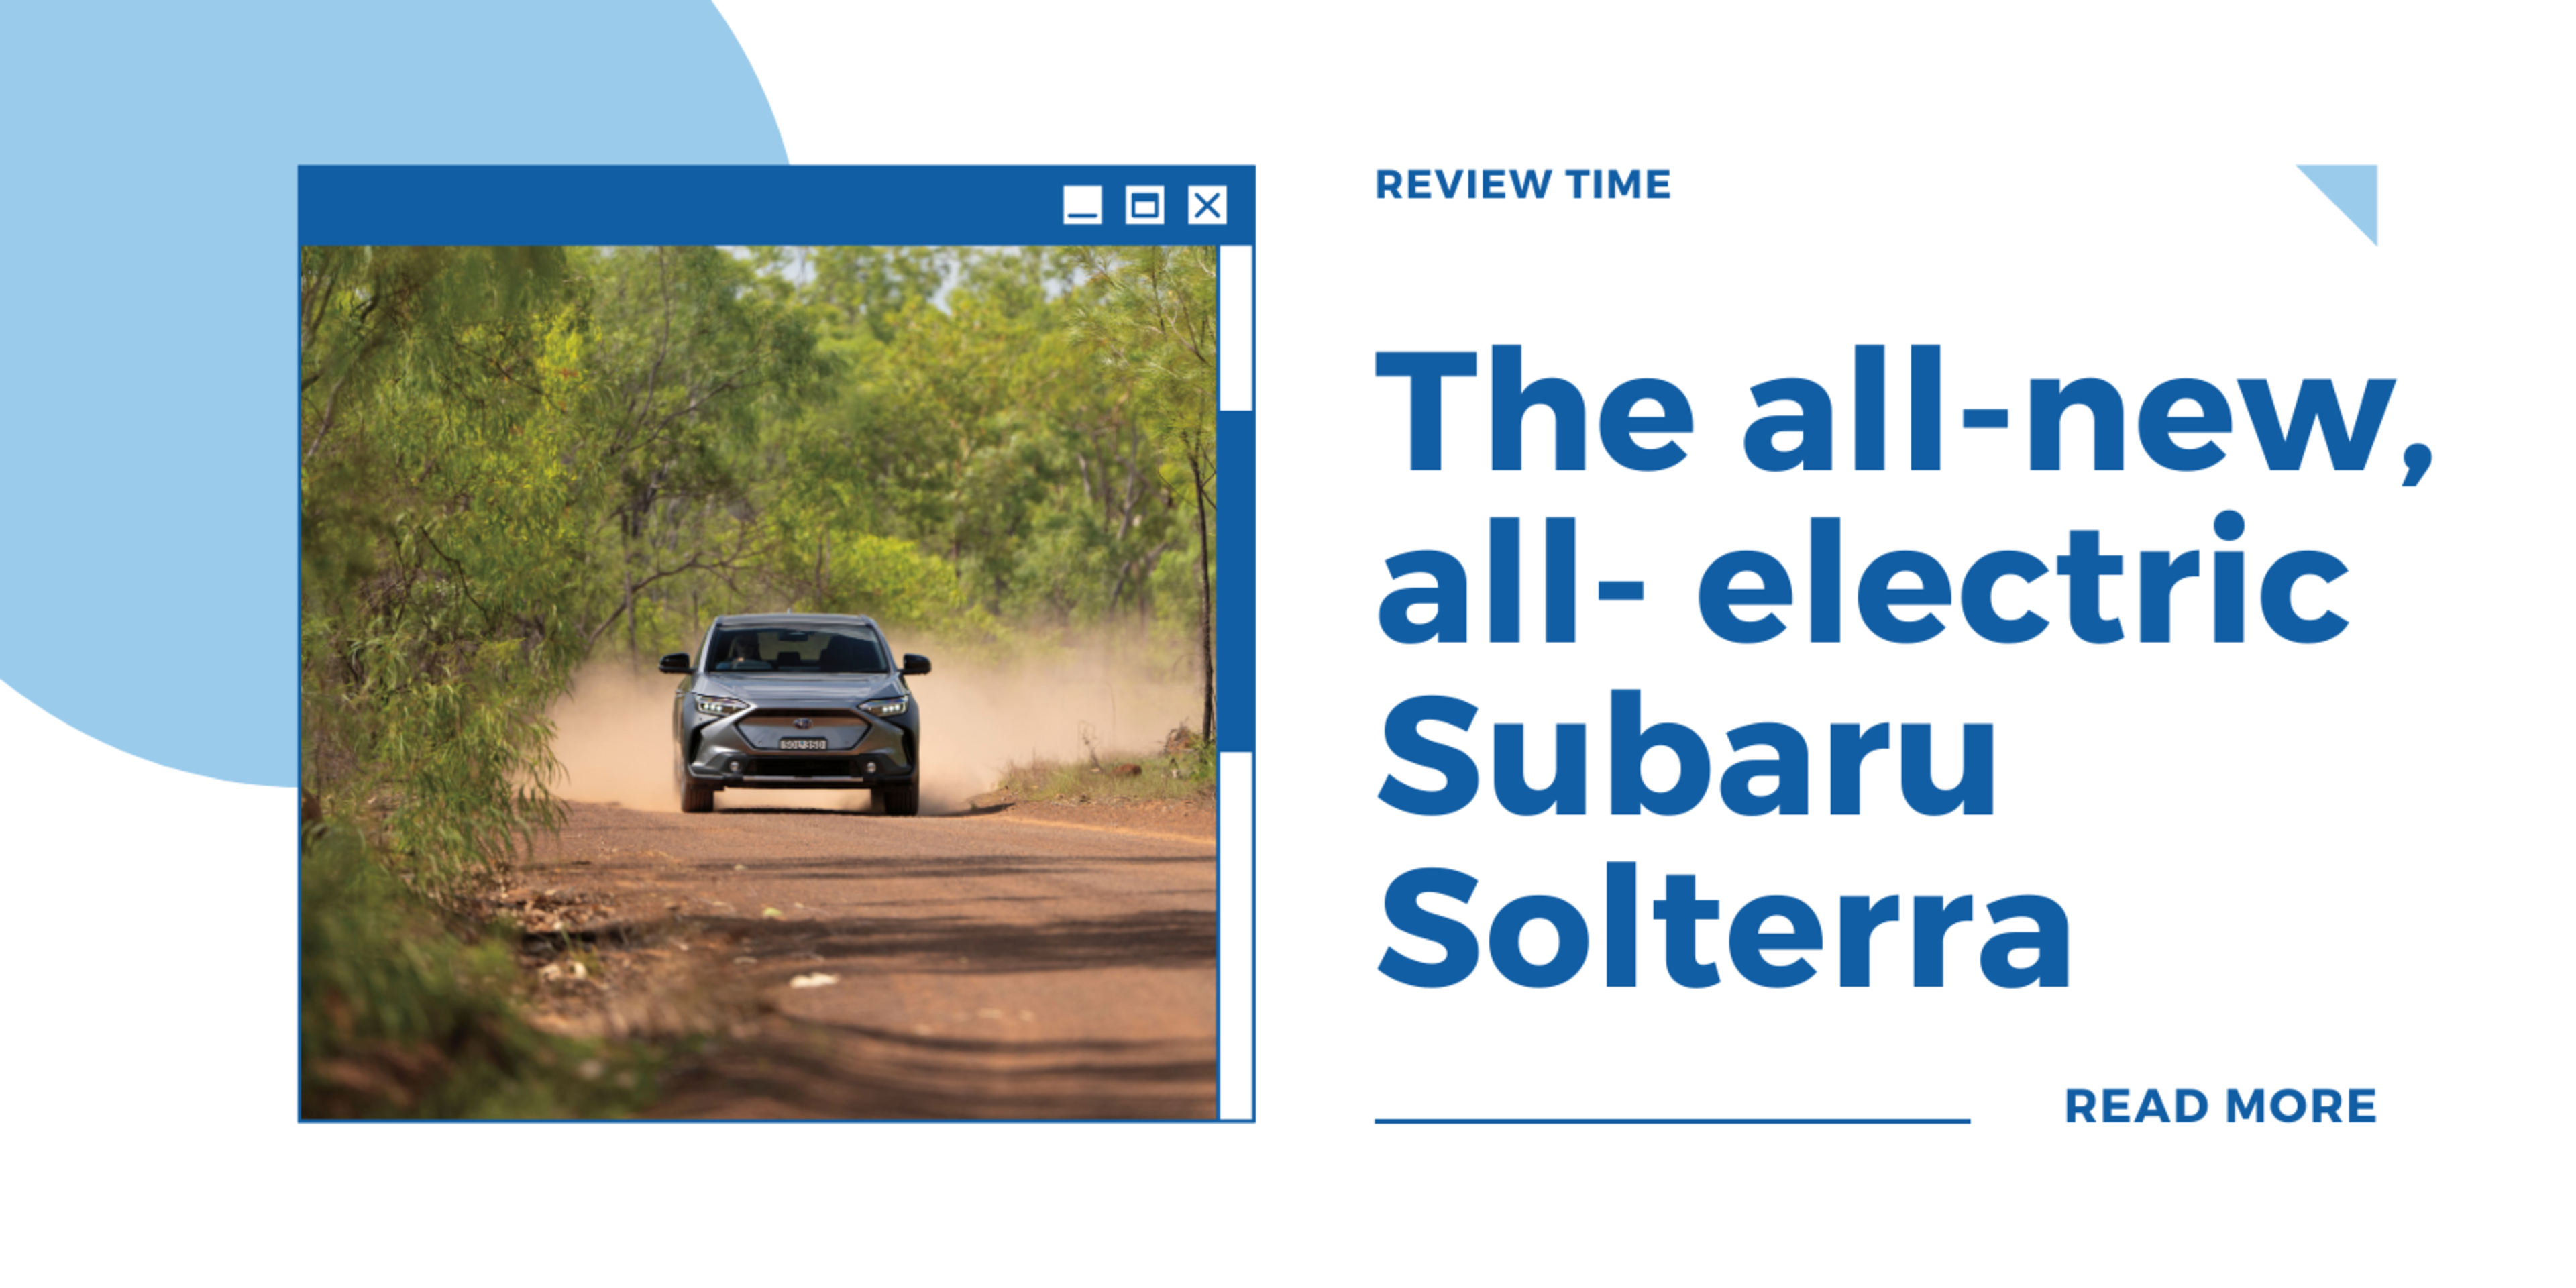 The all-new, all-electric Subaru Solterra is here! featured image